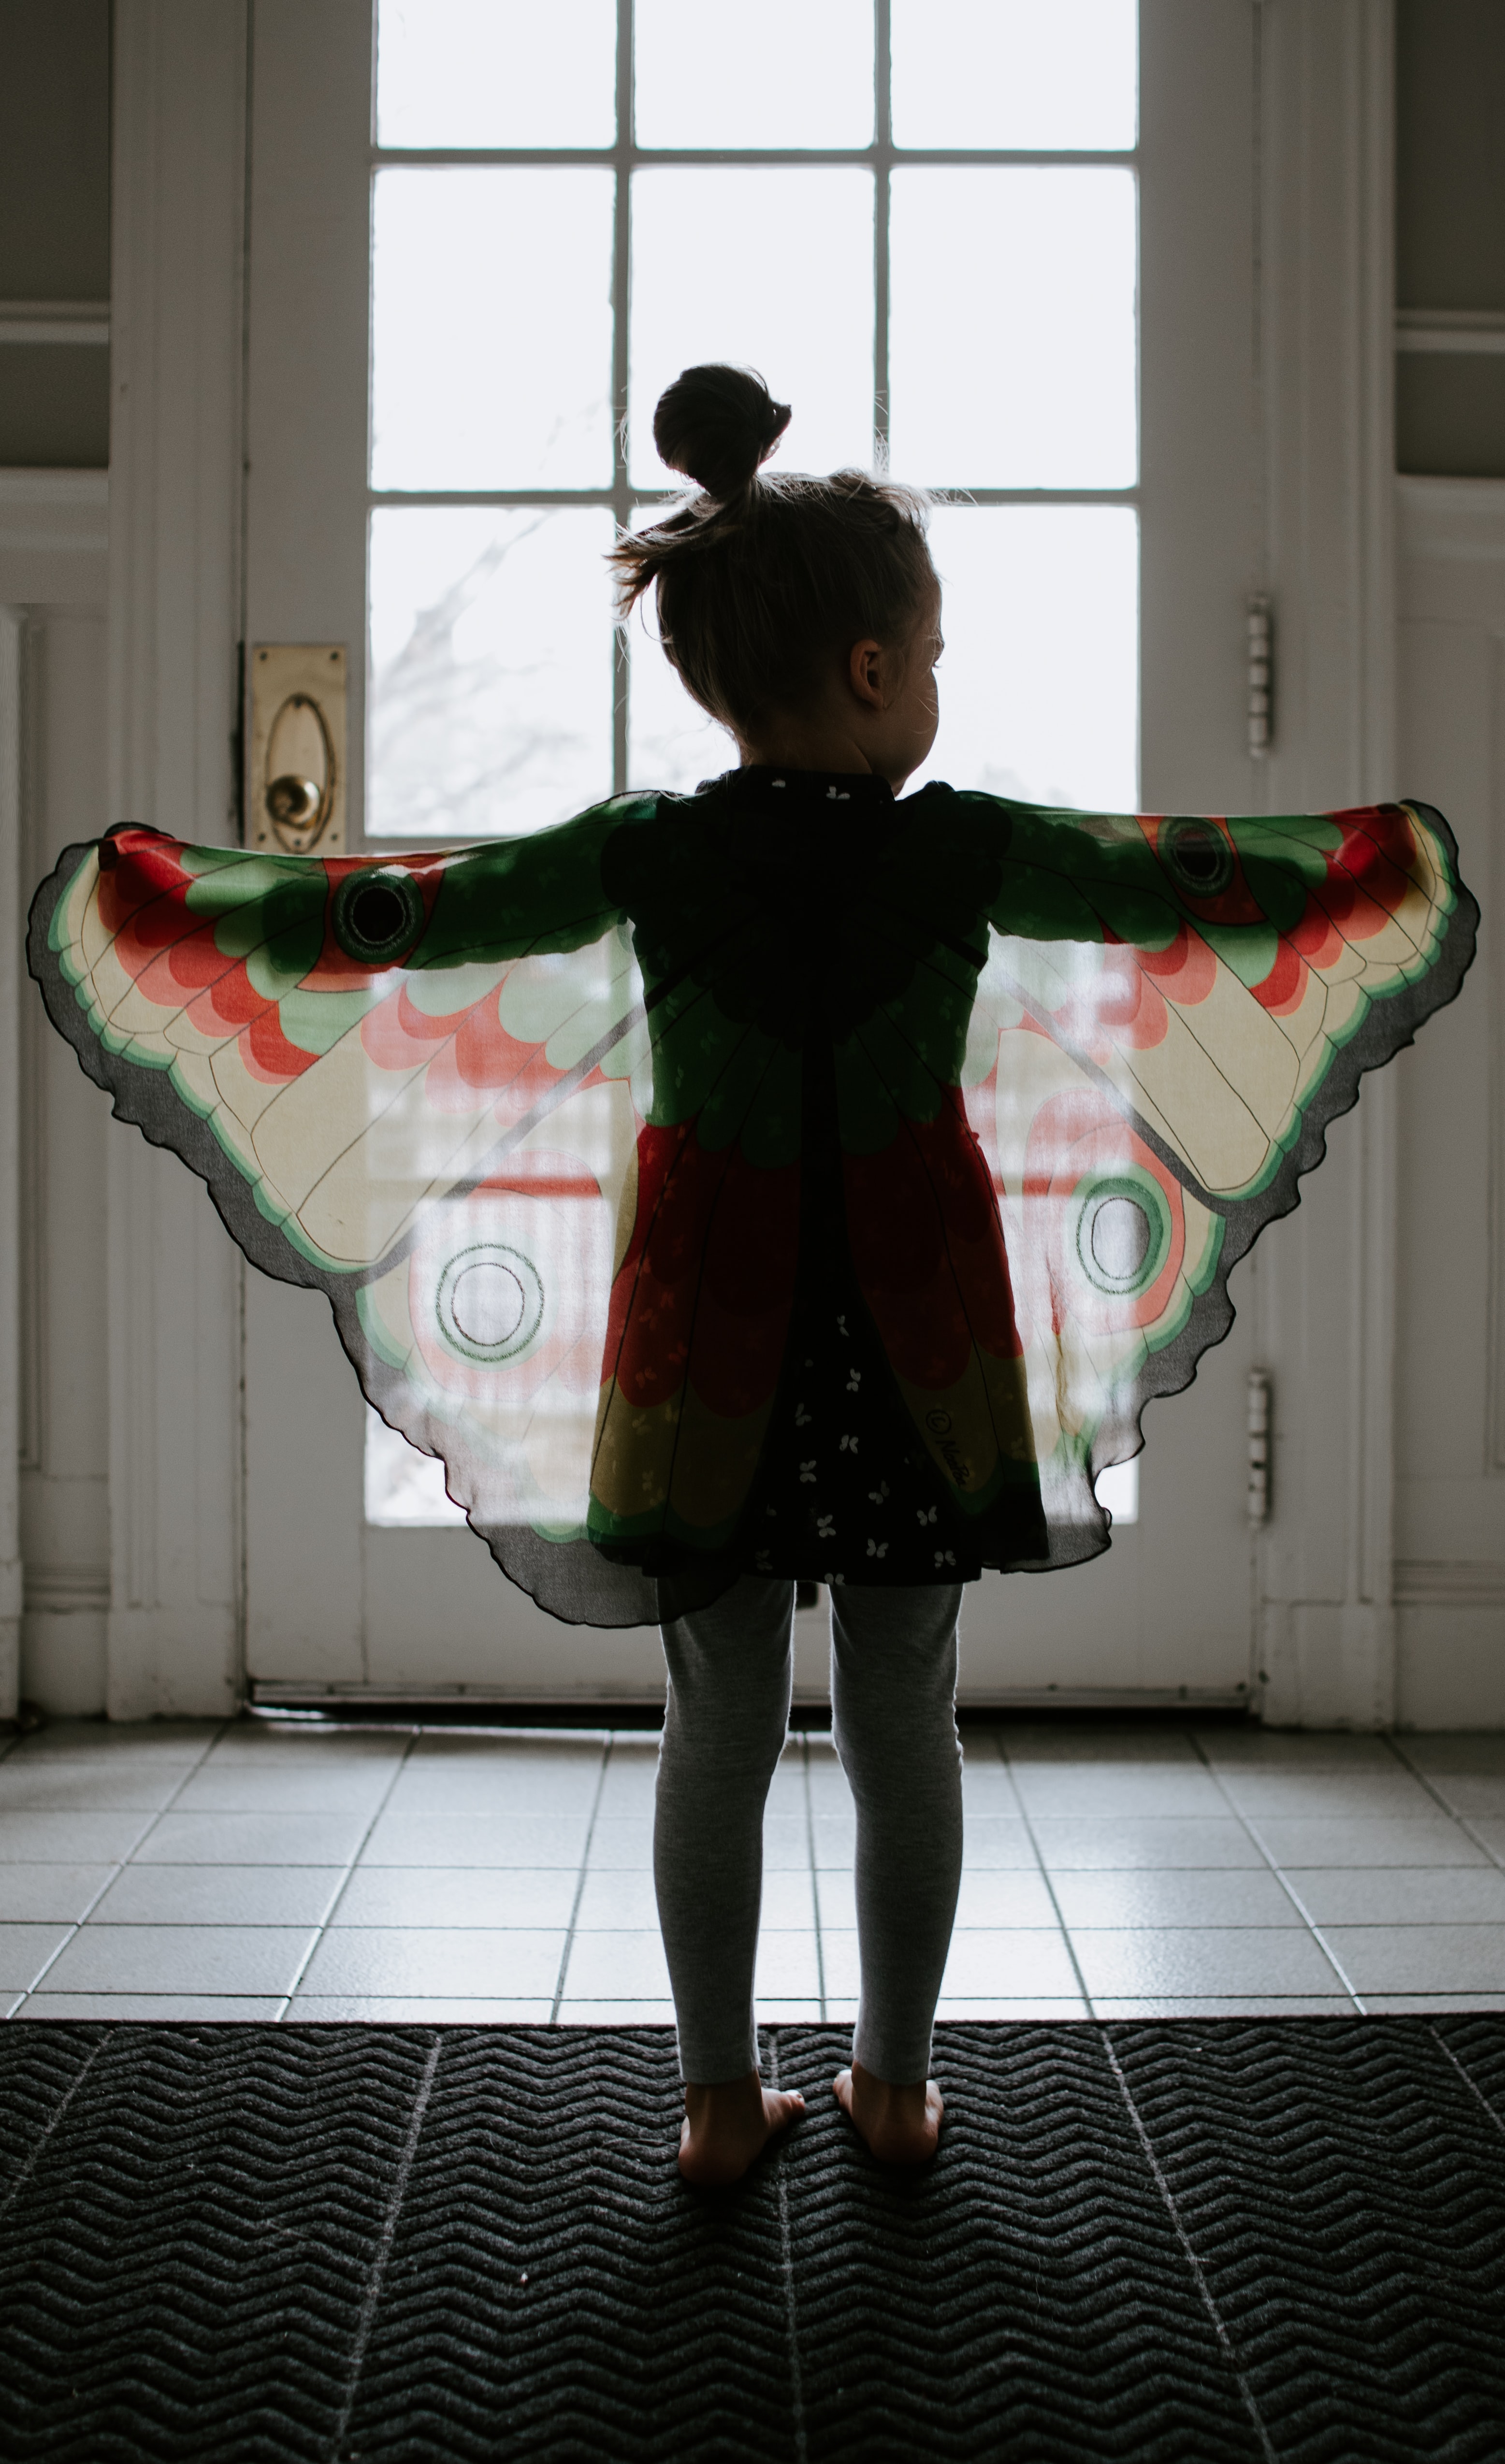 Churchich Recreation Imagination Supports Development Young Girl Arms Spread Out Holding Butterfly Wing Cape Imagining She's a Butterfly